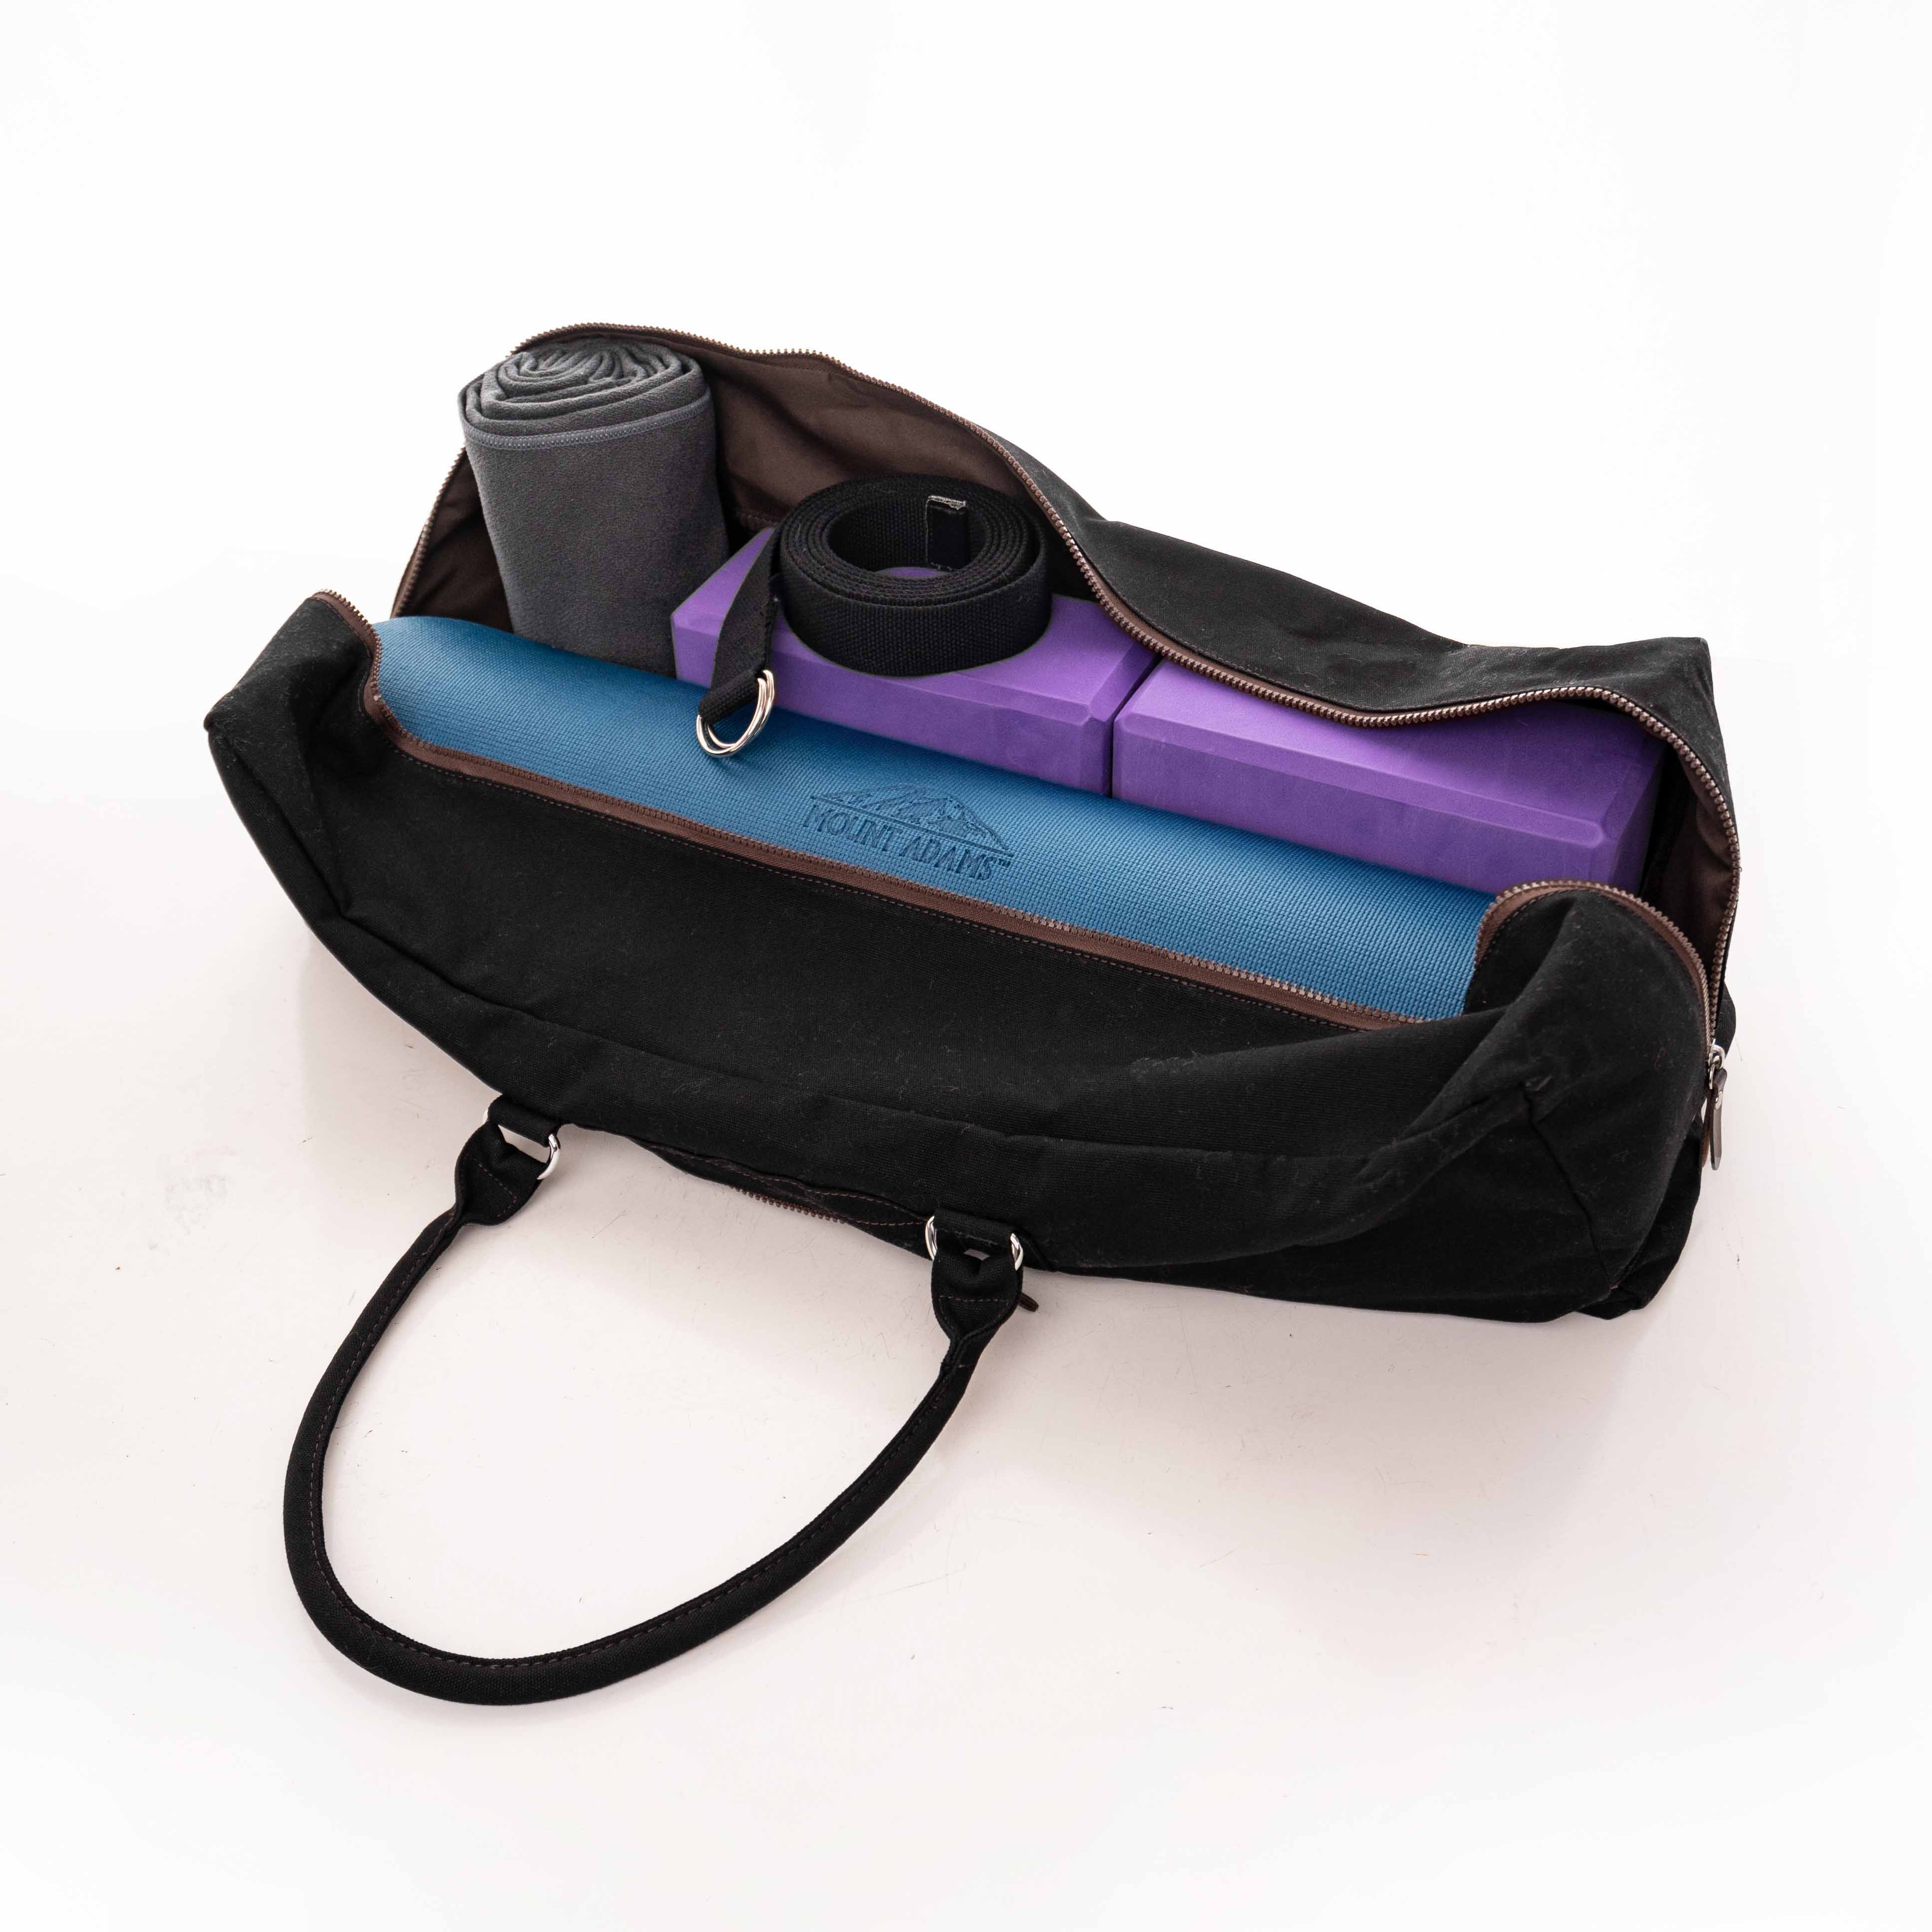 yoga matt duffle bag with space for blocks, straps, and blanket